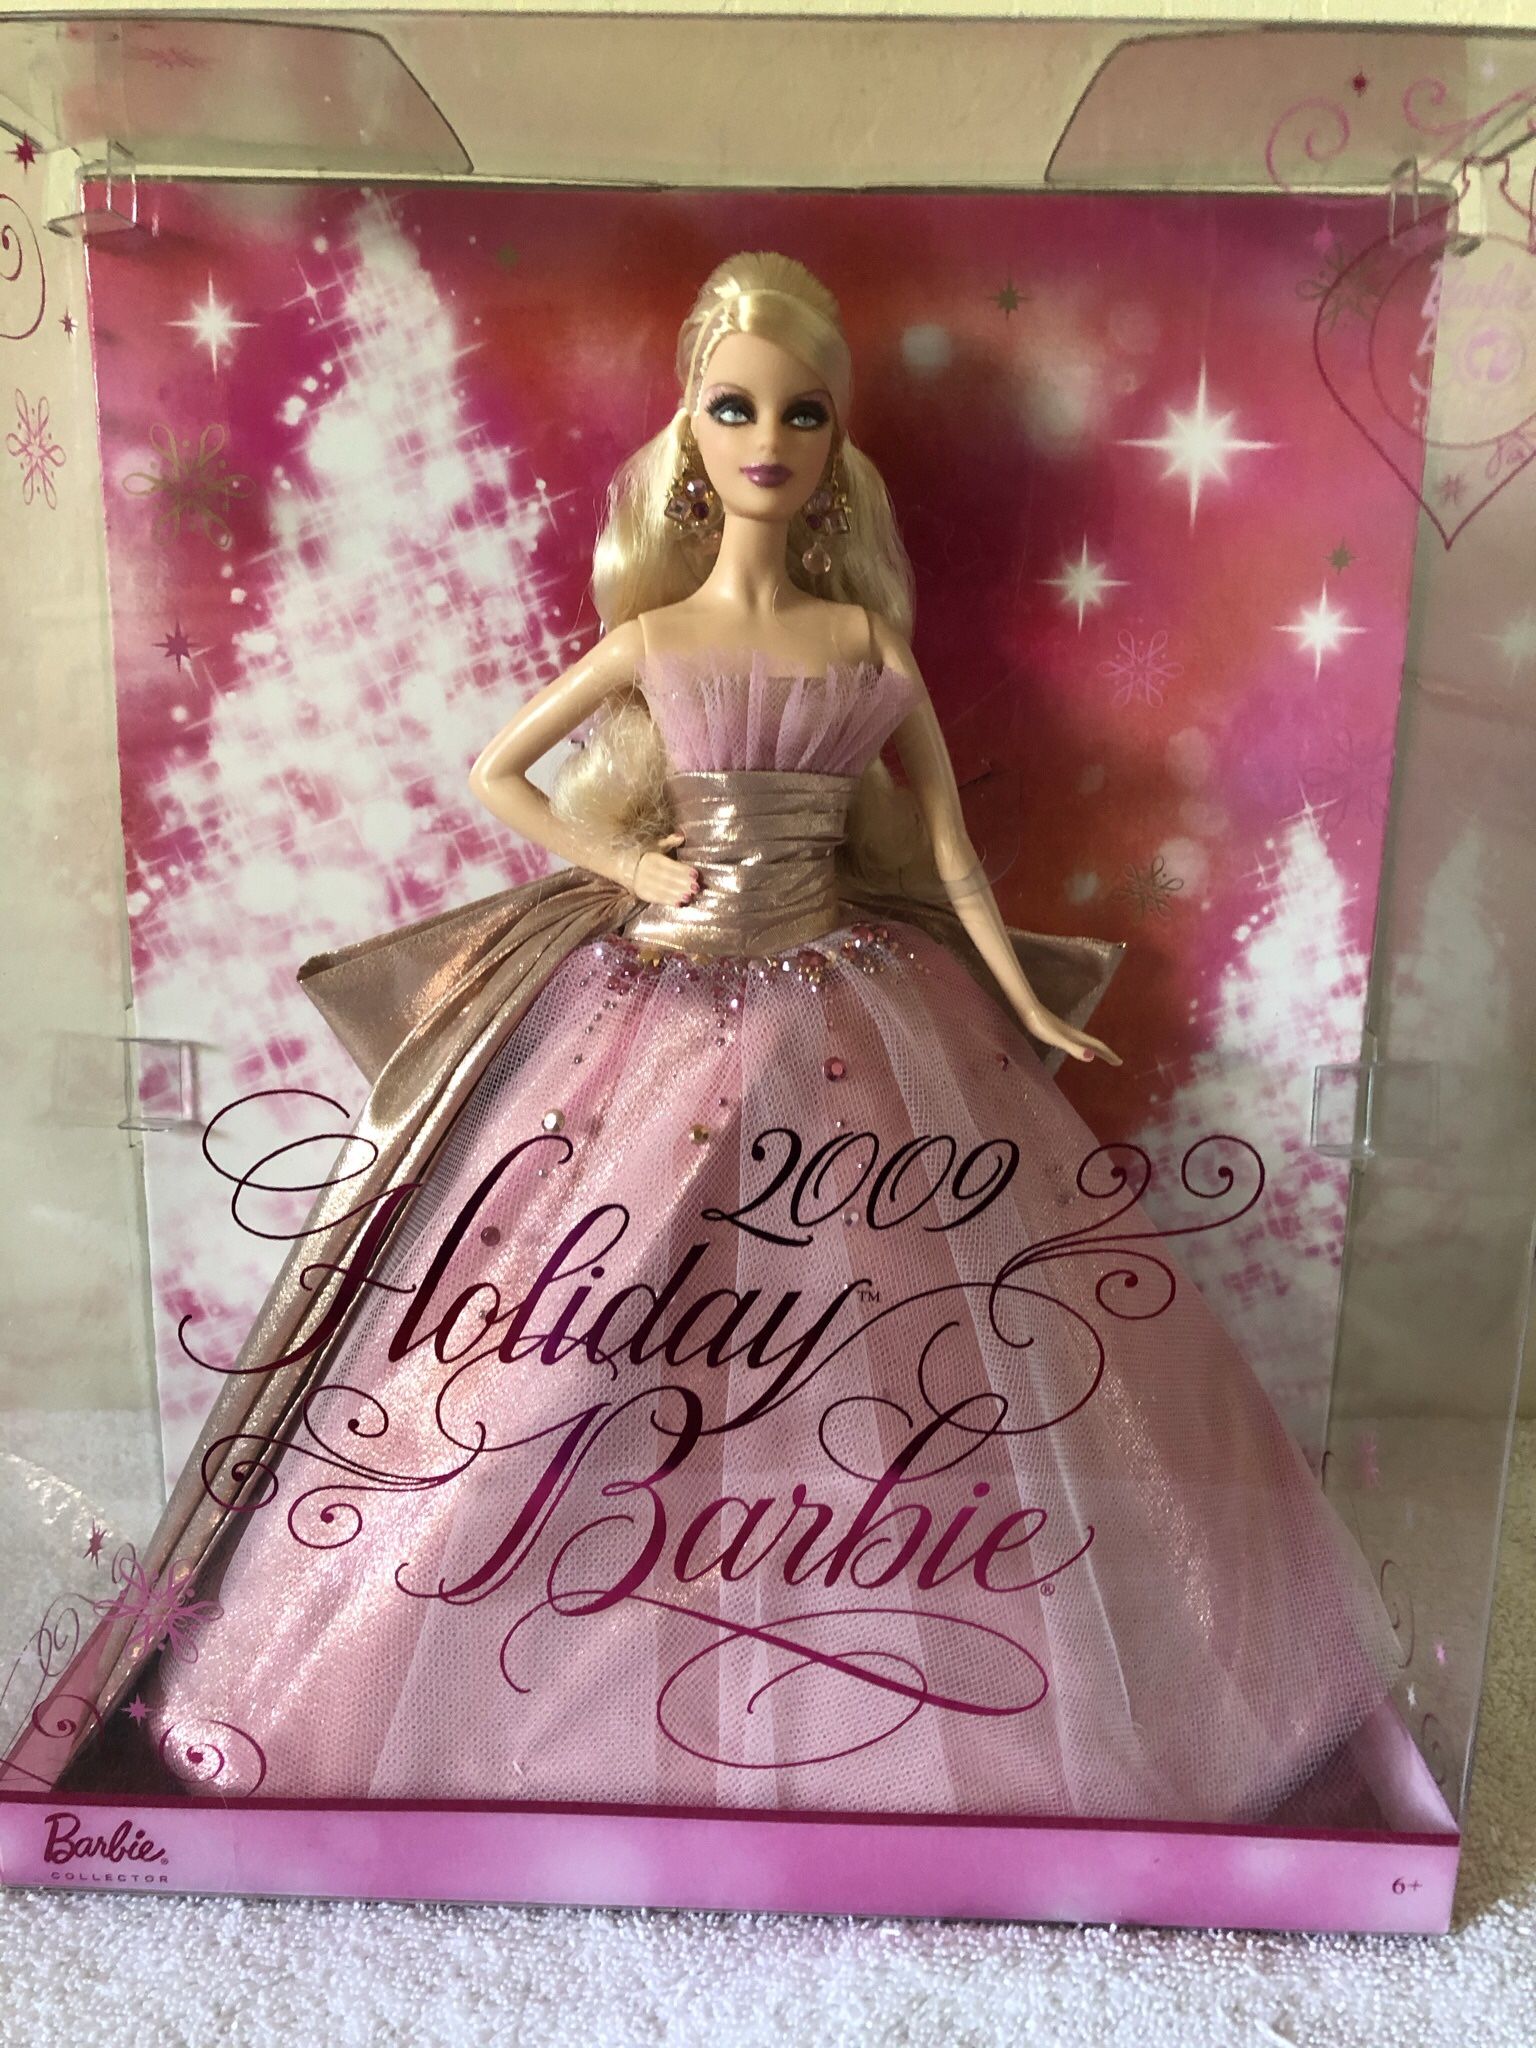 Collectible Barbie 2009 Holiday Barbie 